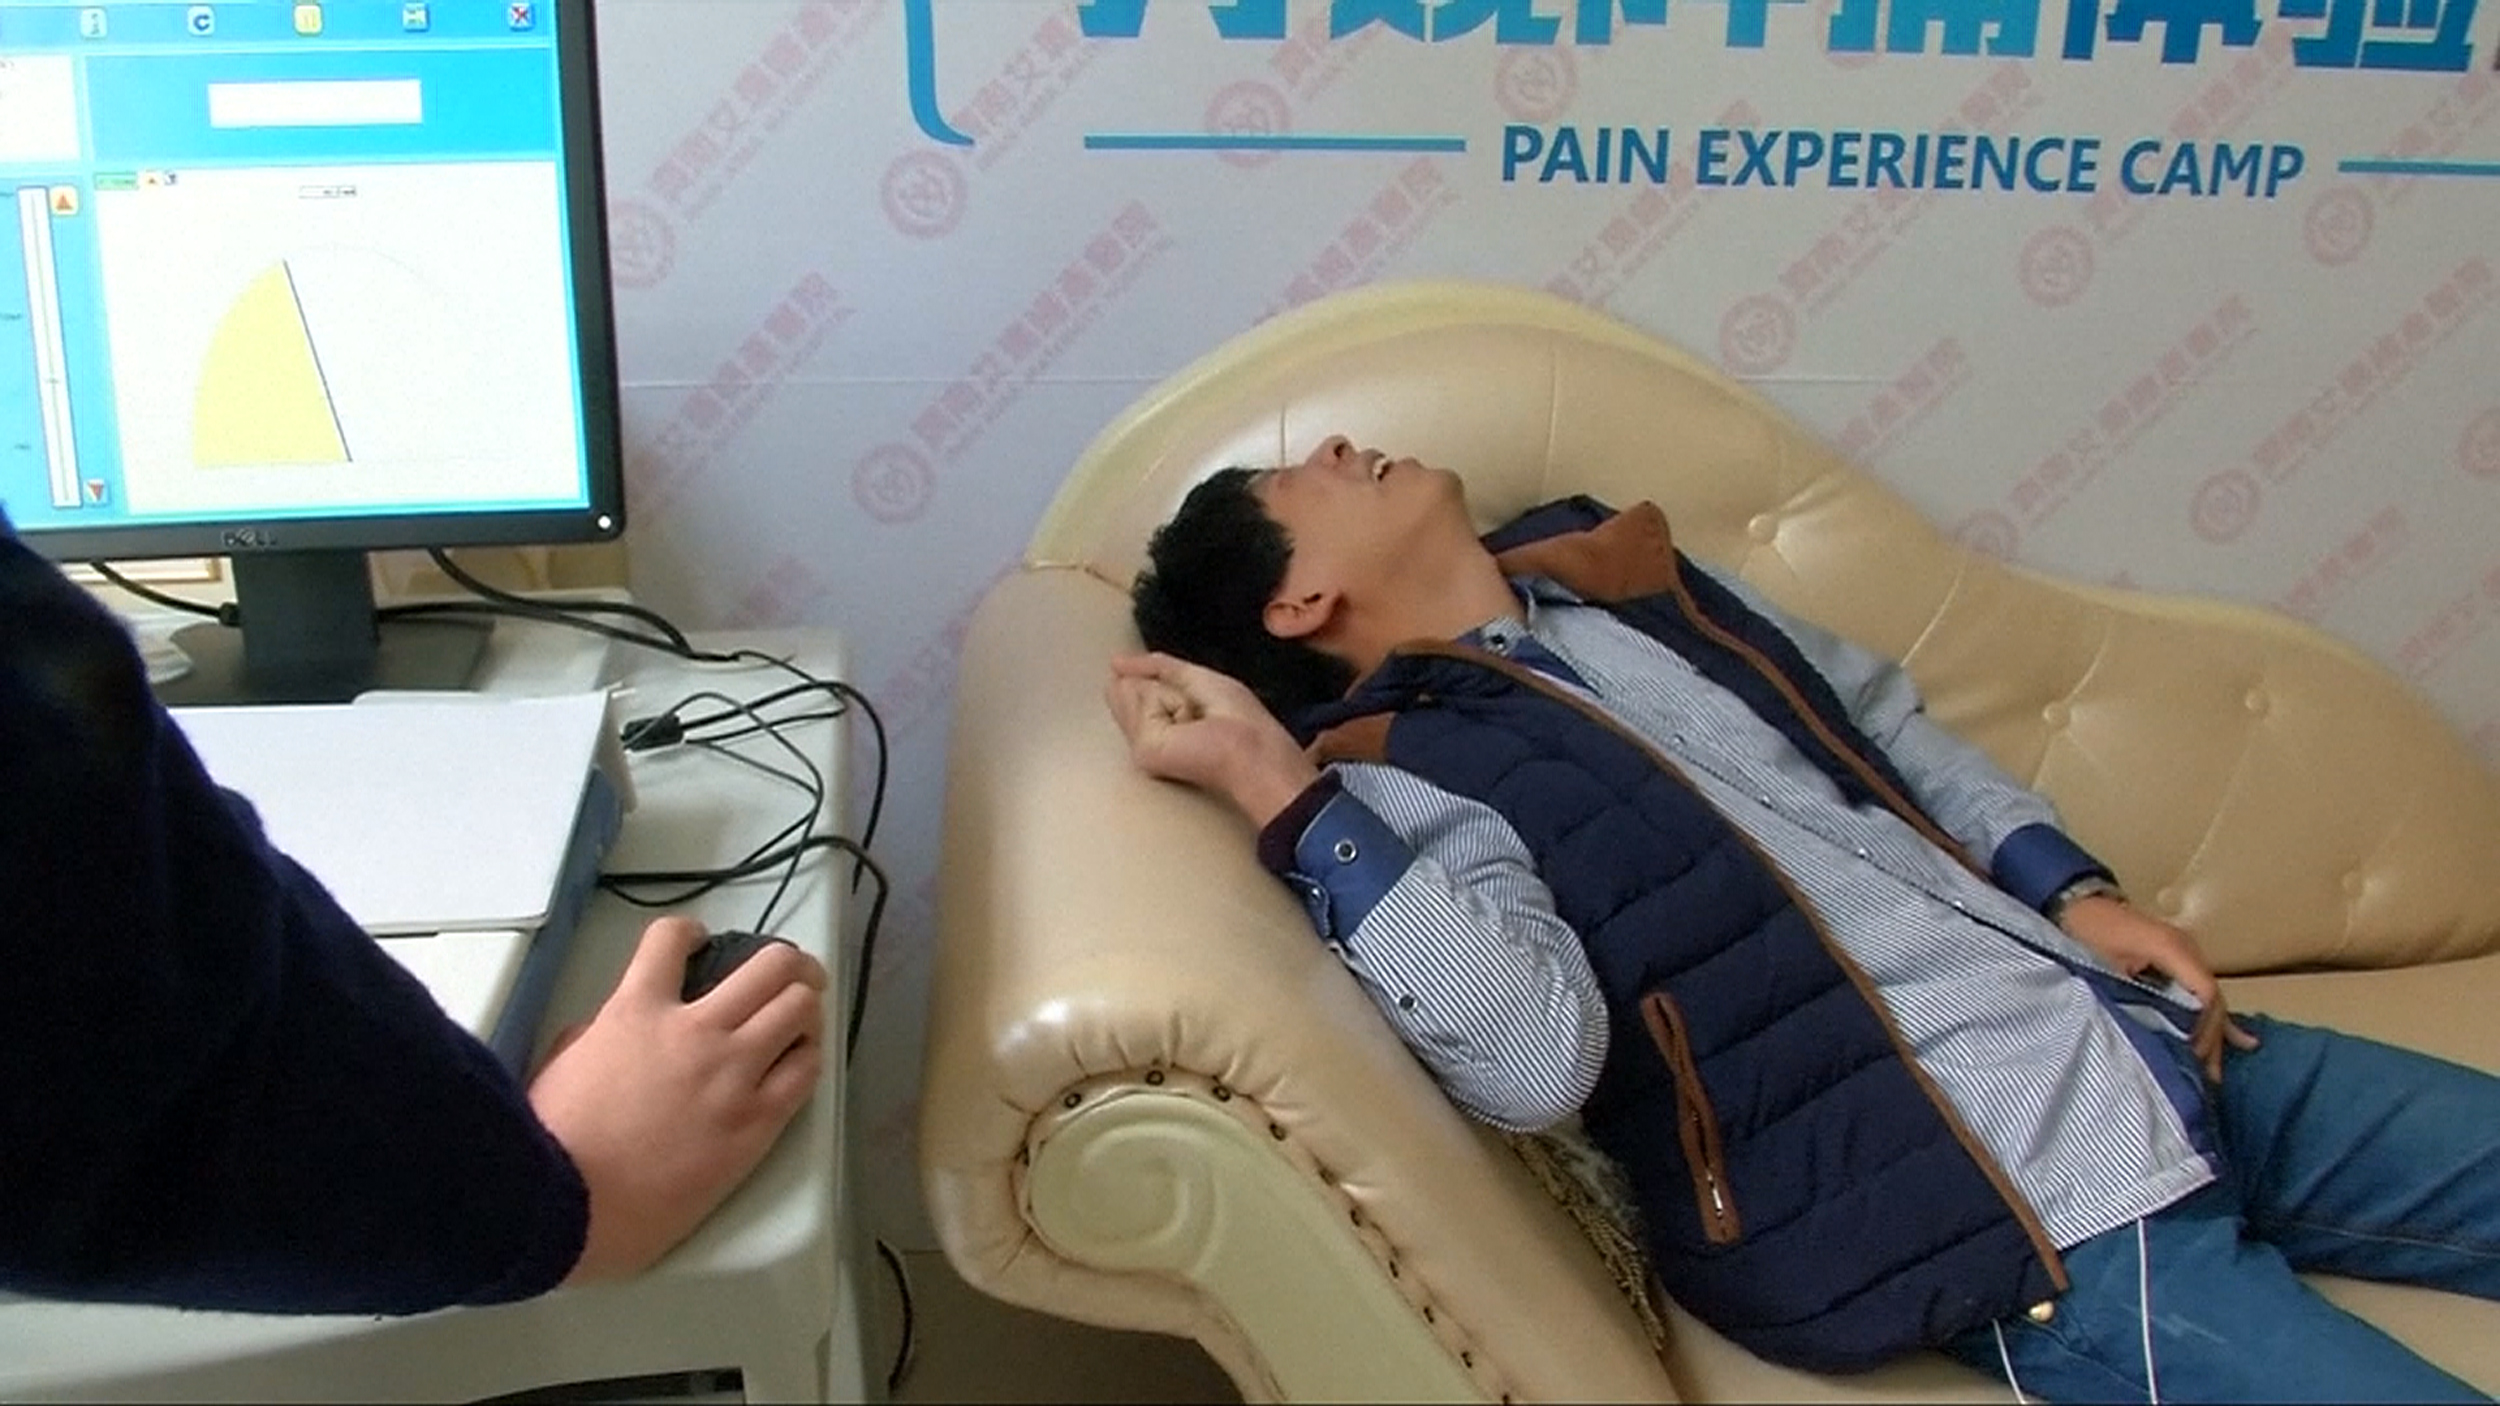 VIDEO: Men use simulator to experience labour pains